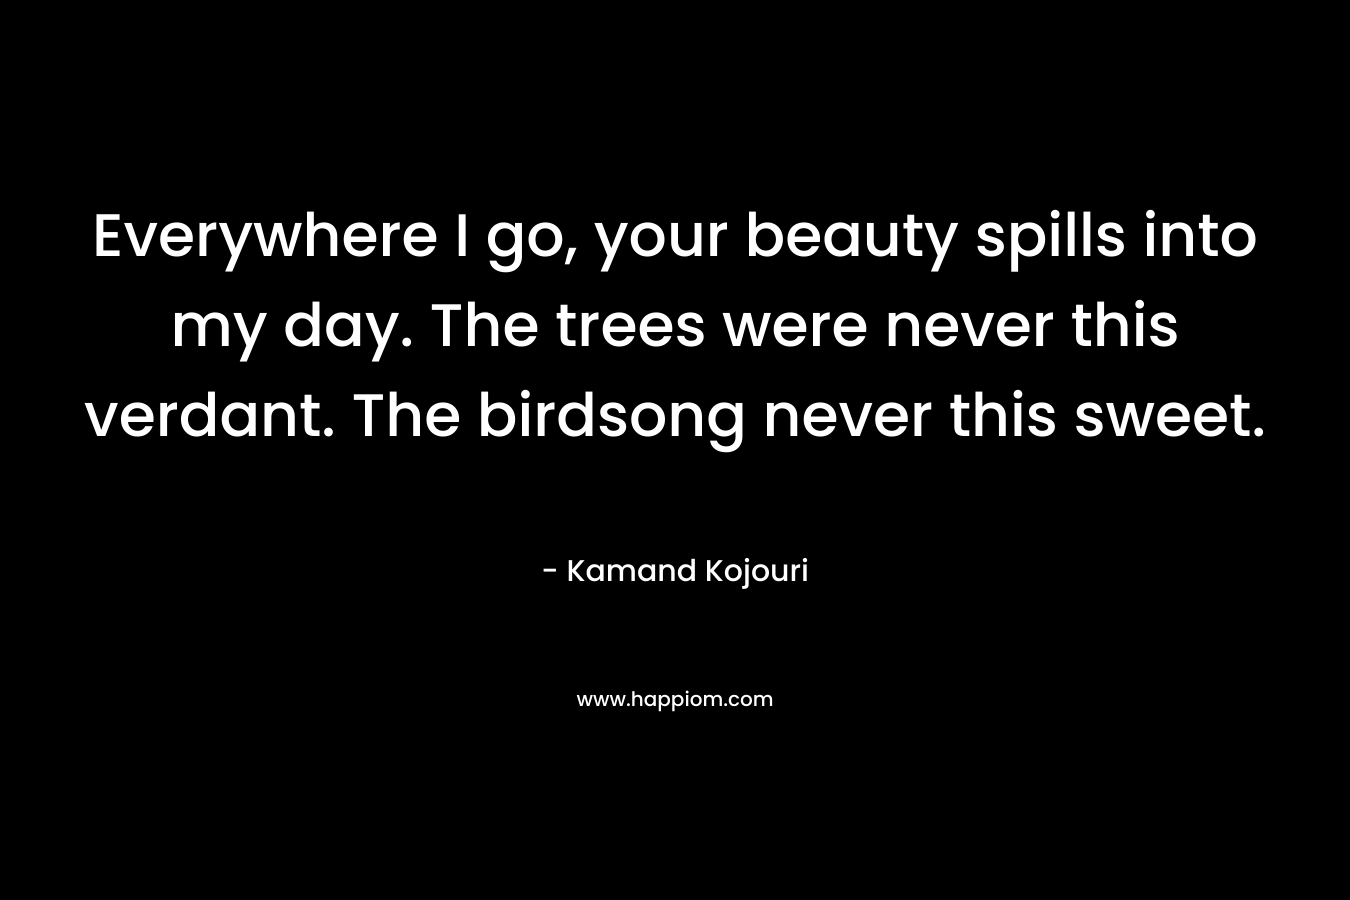 Everywhere I go, your beauty spills into my day. The trees were never this verdant. The birdsong never this sweet.